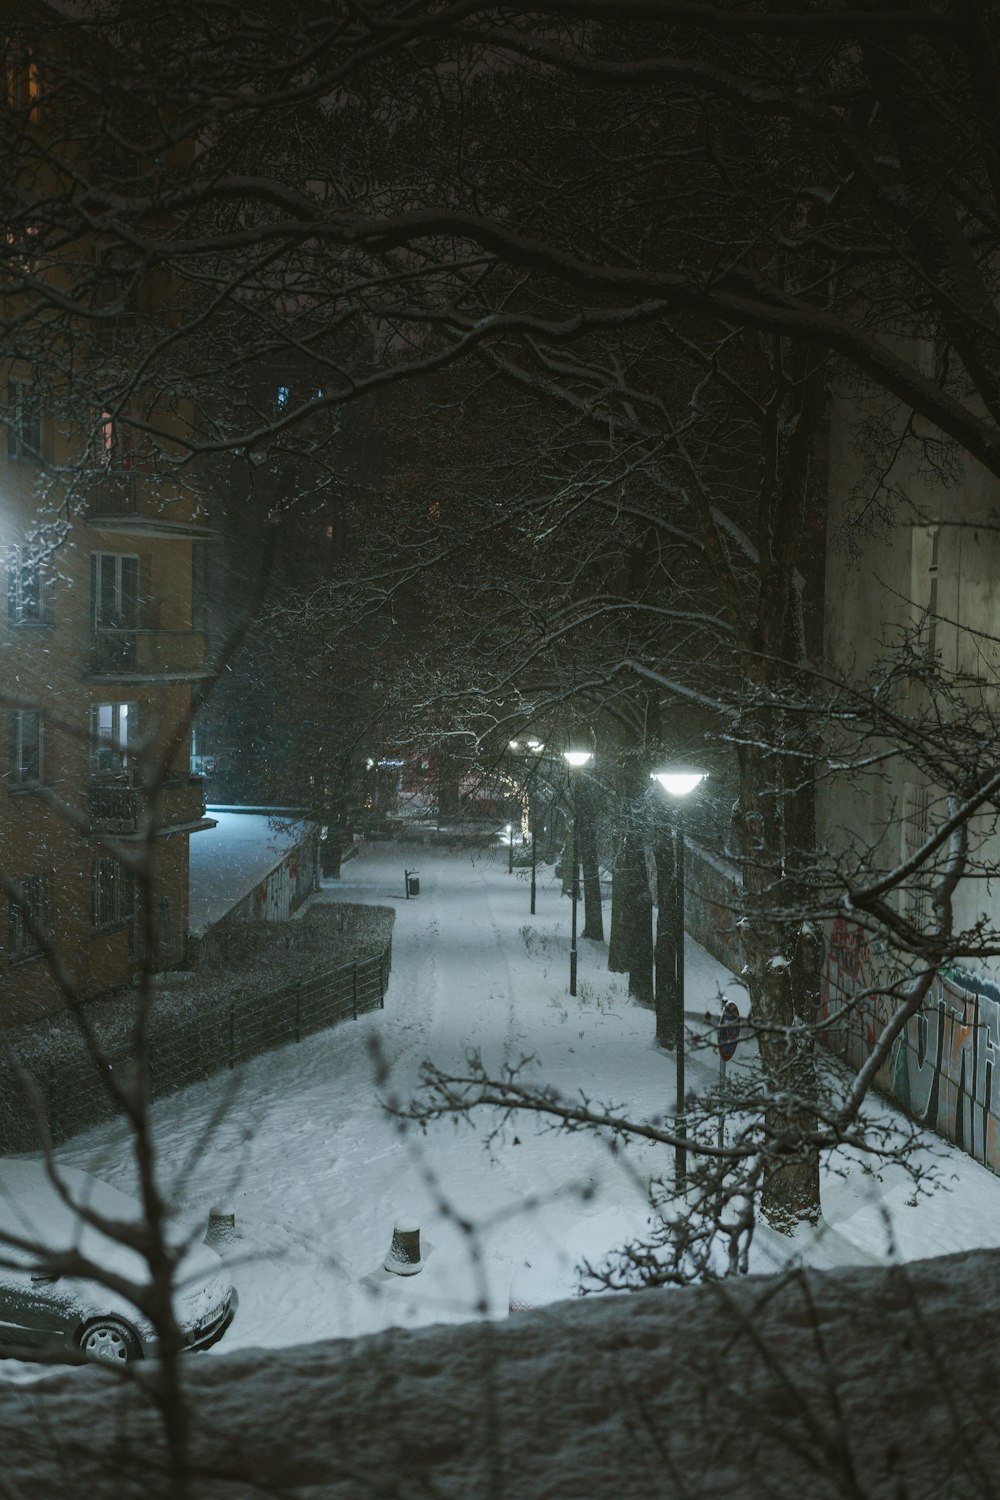 a city street is covered in snow at night